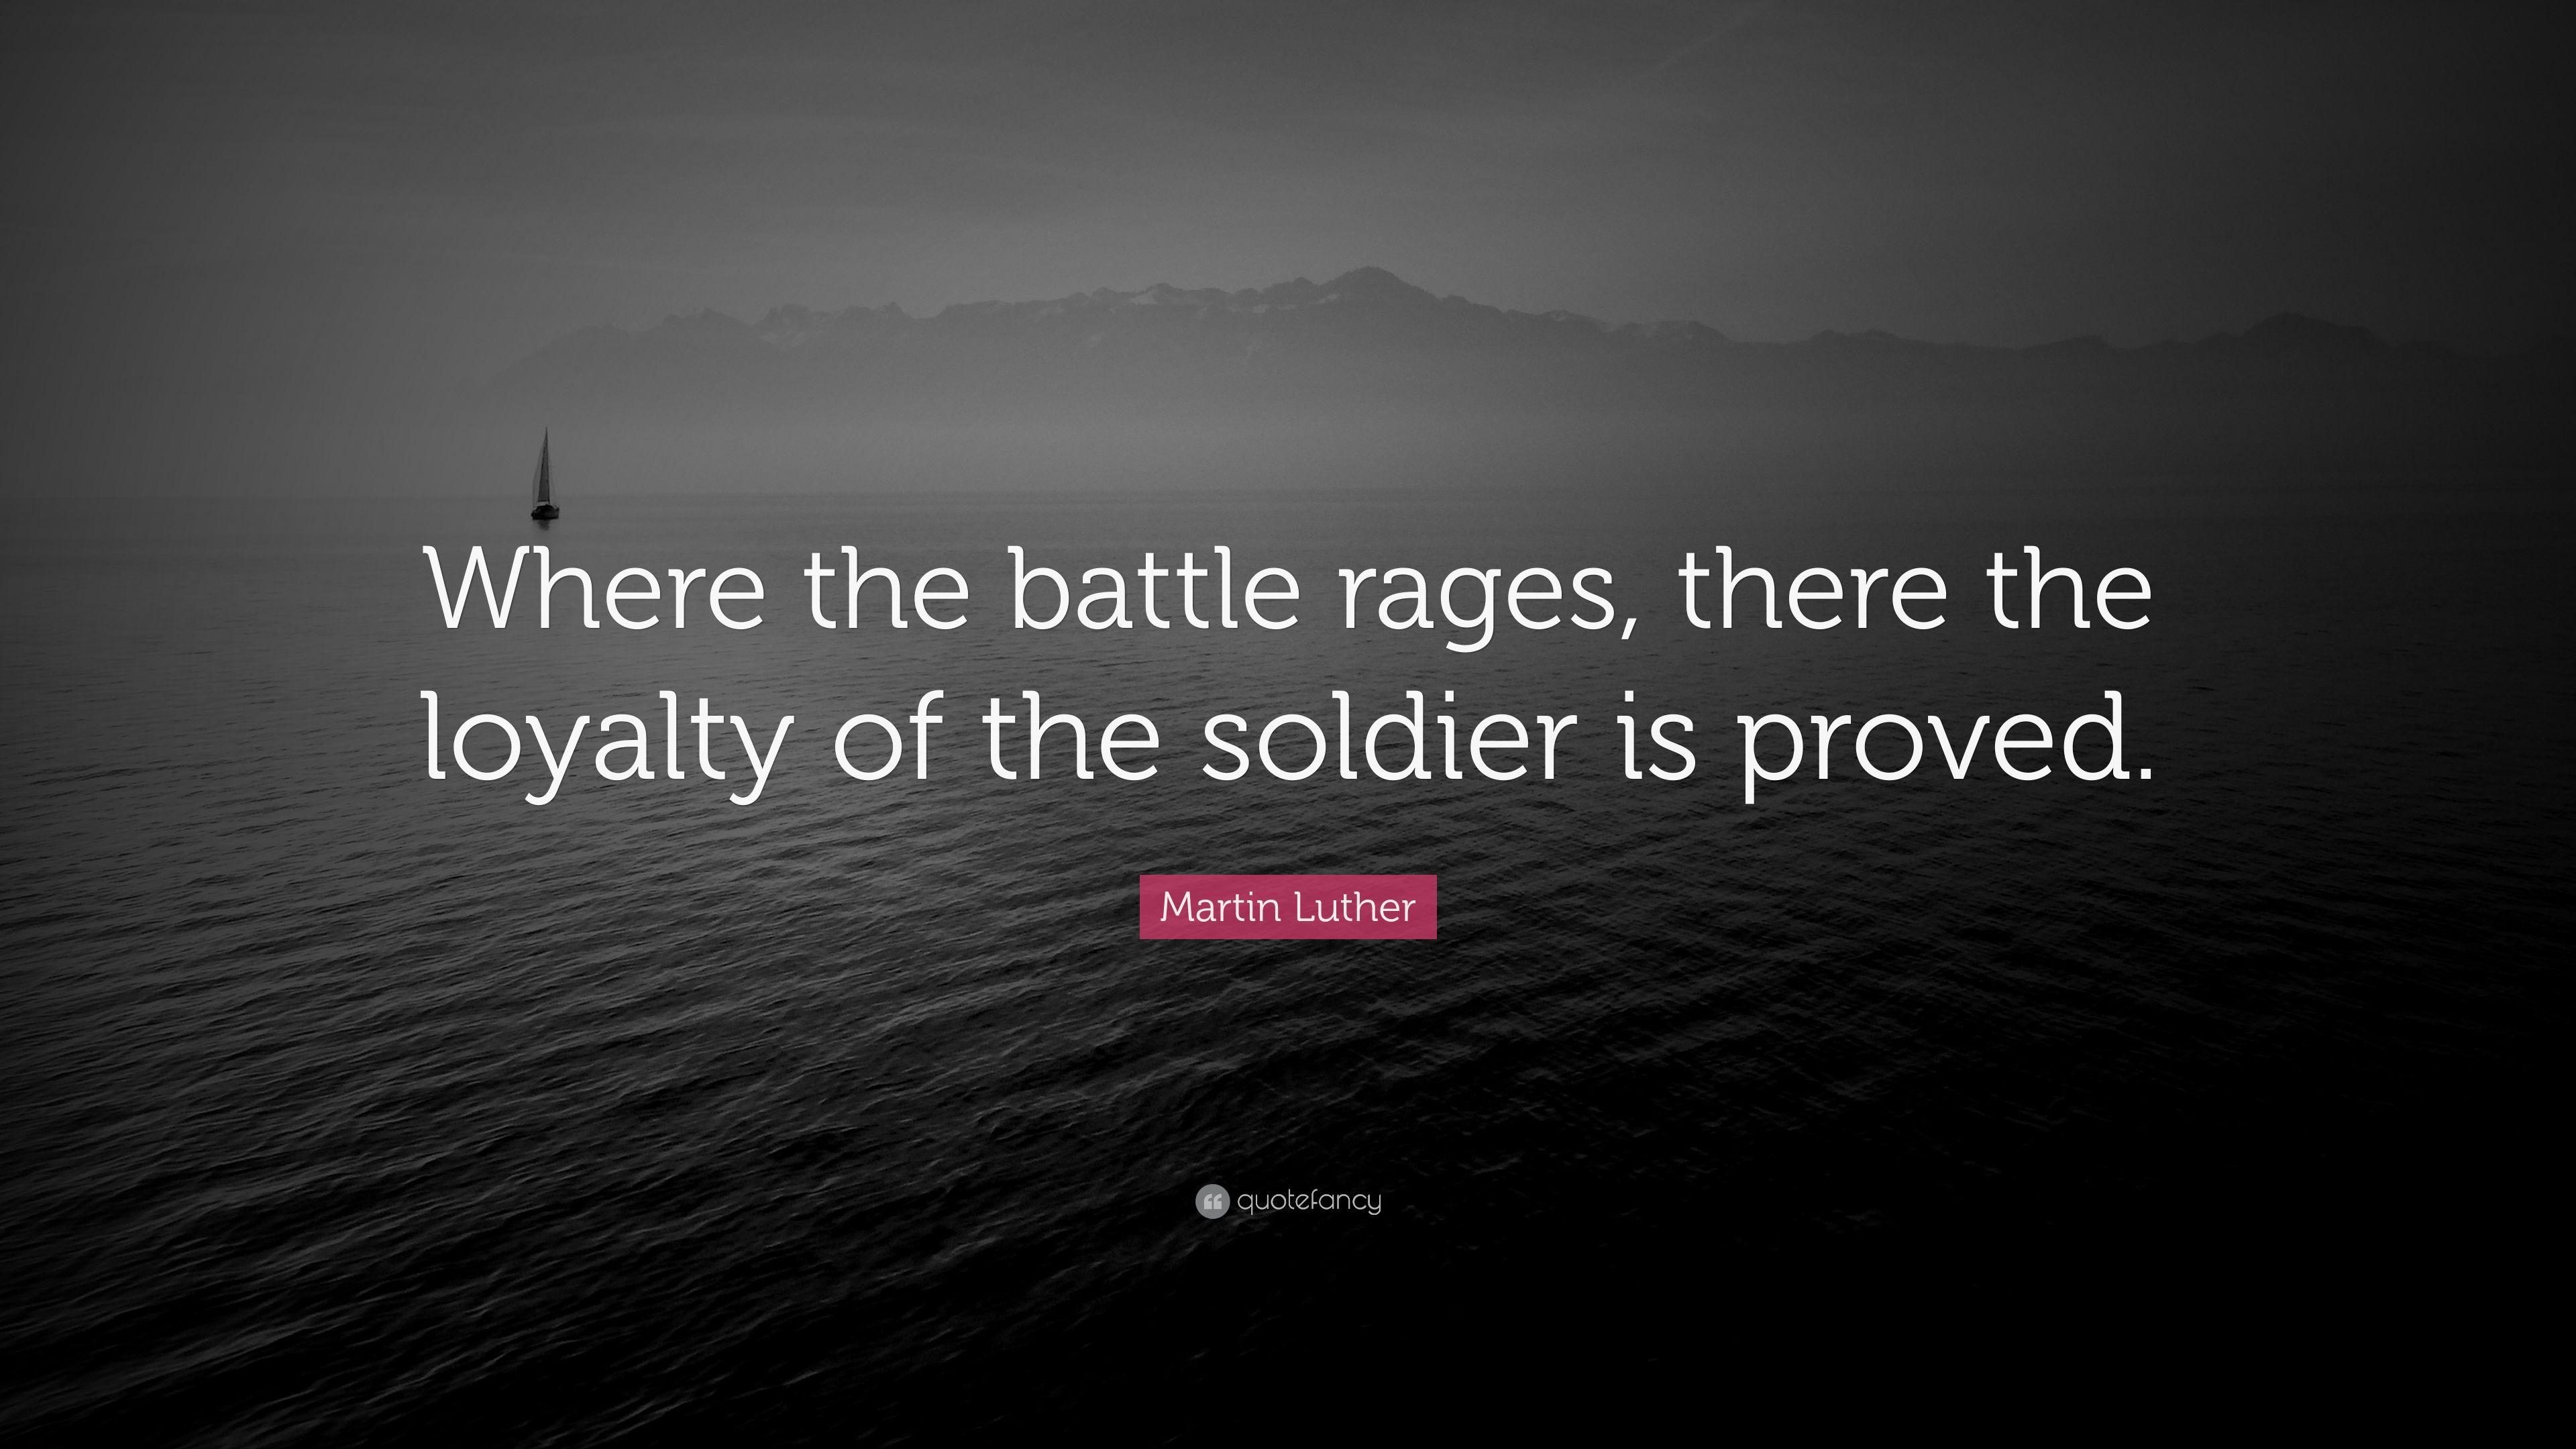 Martin Luther Quote: “Where the battle rages, there the loyalty